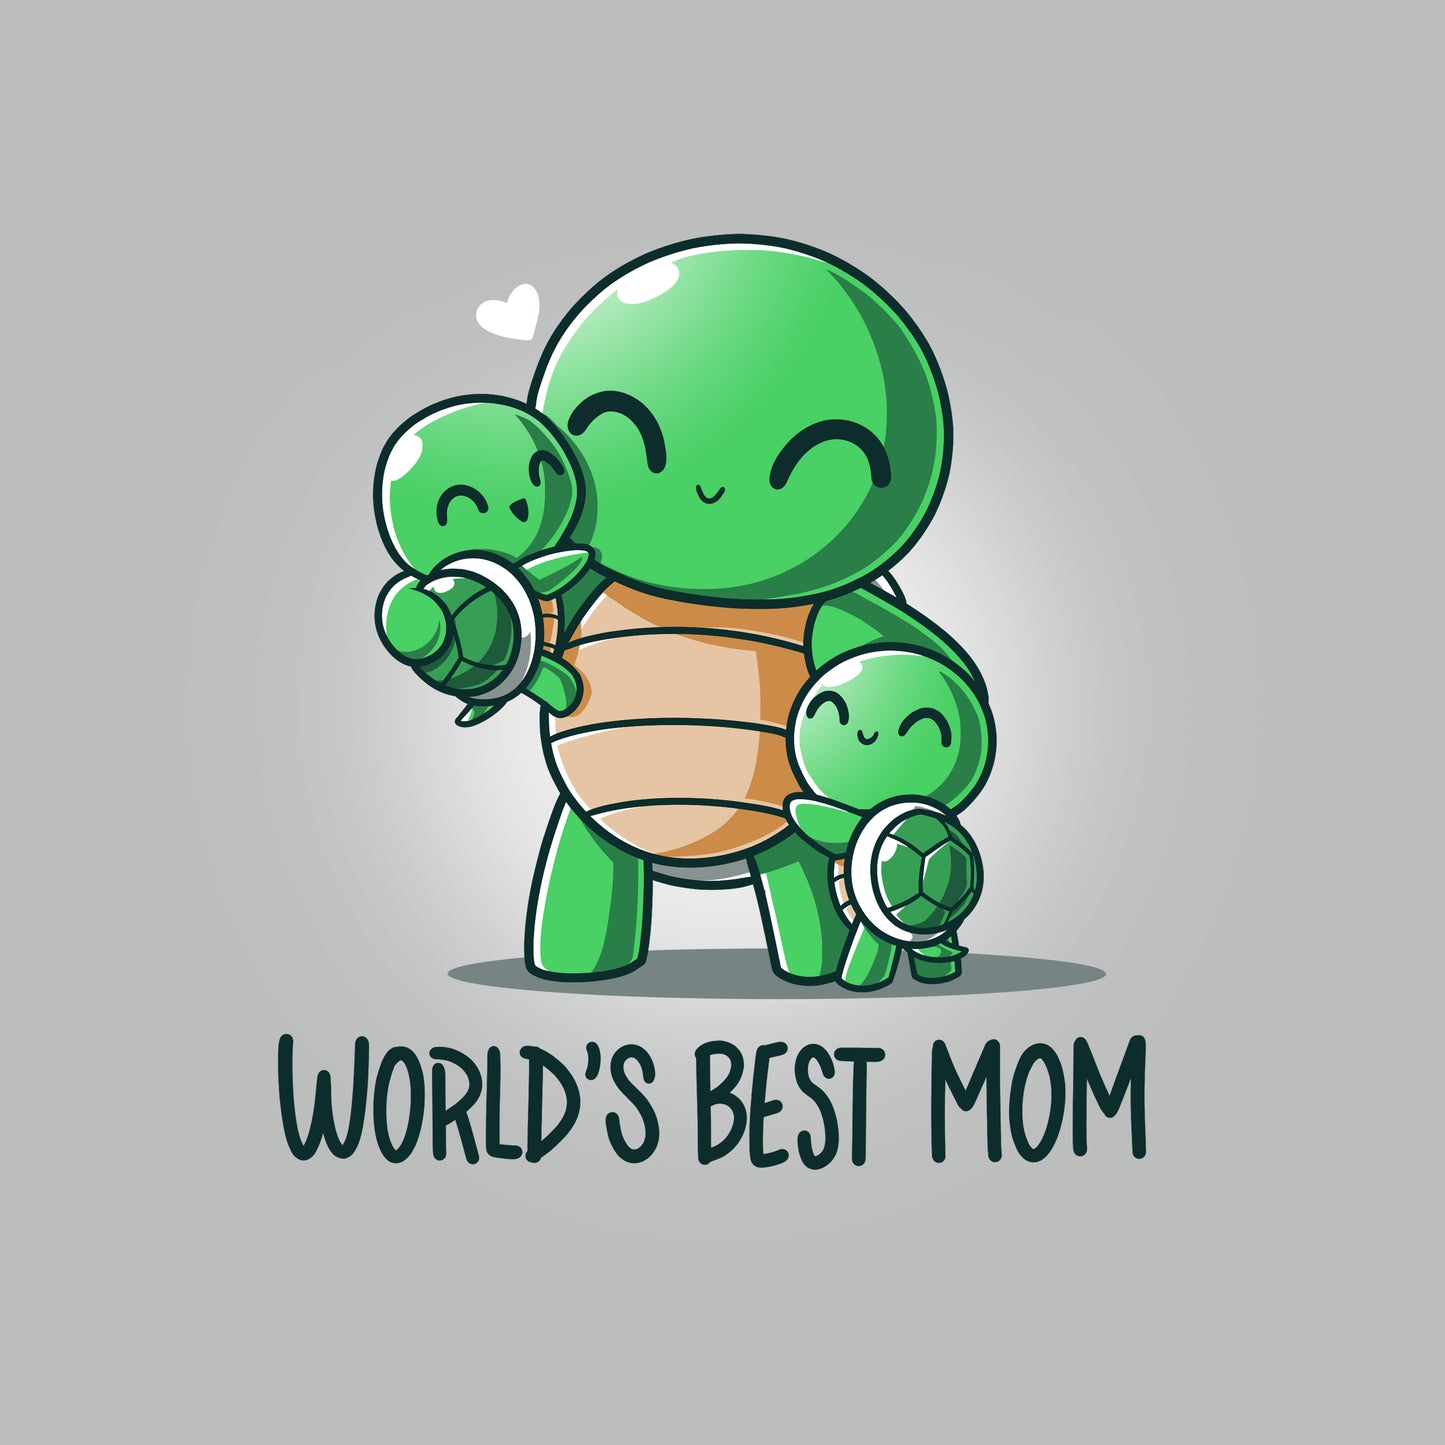 Premium Cotton T-shirt - Cartoon turtle mom holding one baby turtle and hugging another with the text "World's Best Mom apparel" below them. A small heart floats near her head. This design graces a super soft ringspun cotton unisex apparelcalled "World's Best Mom" by monsterdigital.